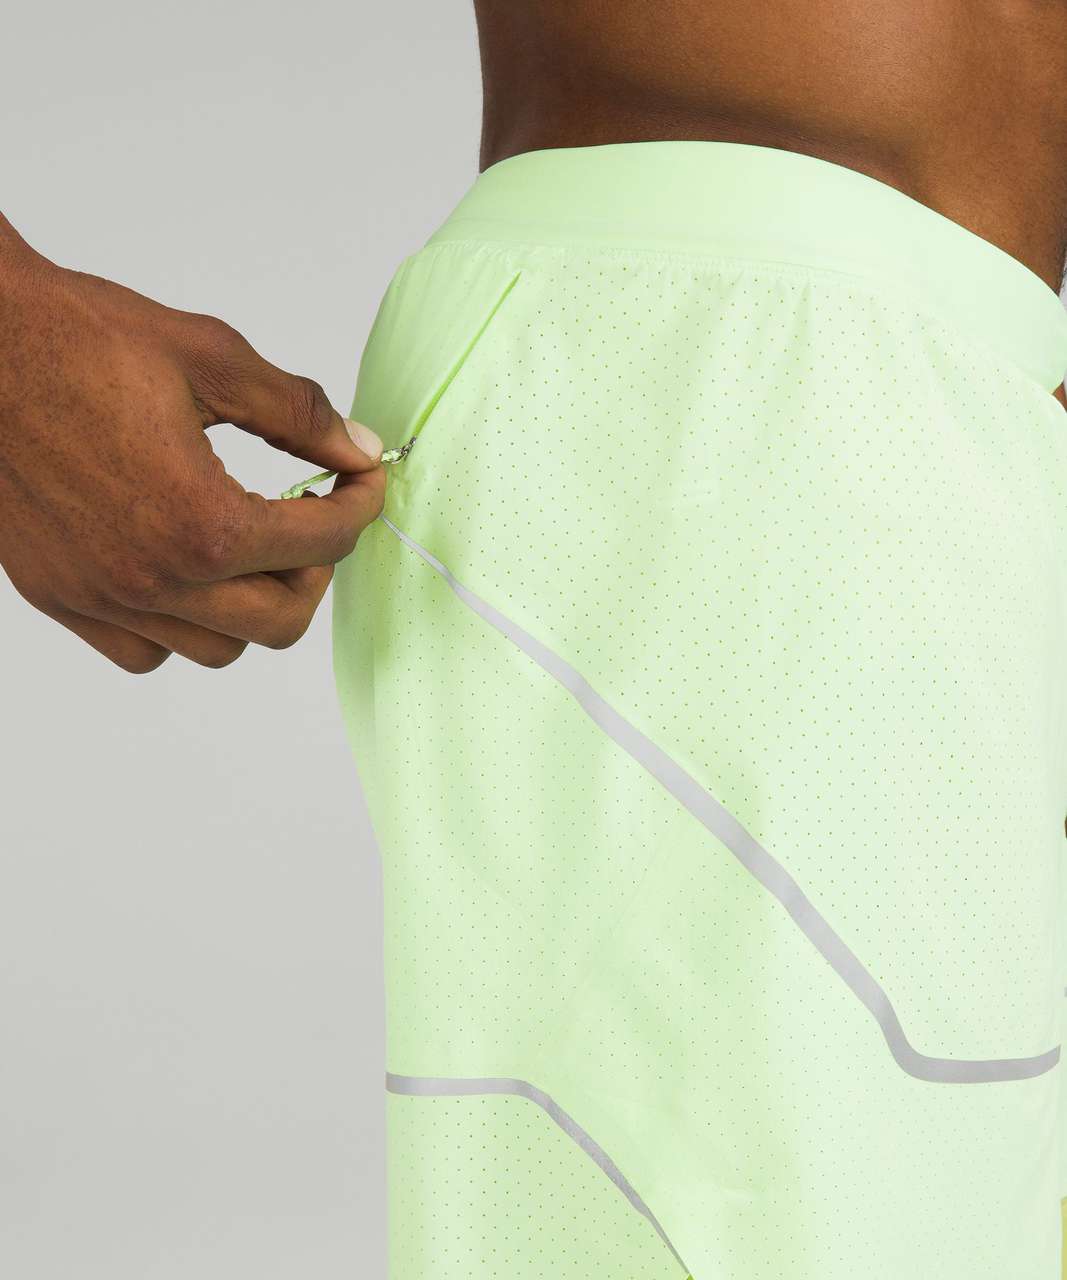 Lululemon Surge Lined Short 6" *Special Edition - Faded Zap / Wasabi